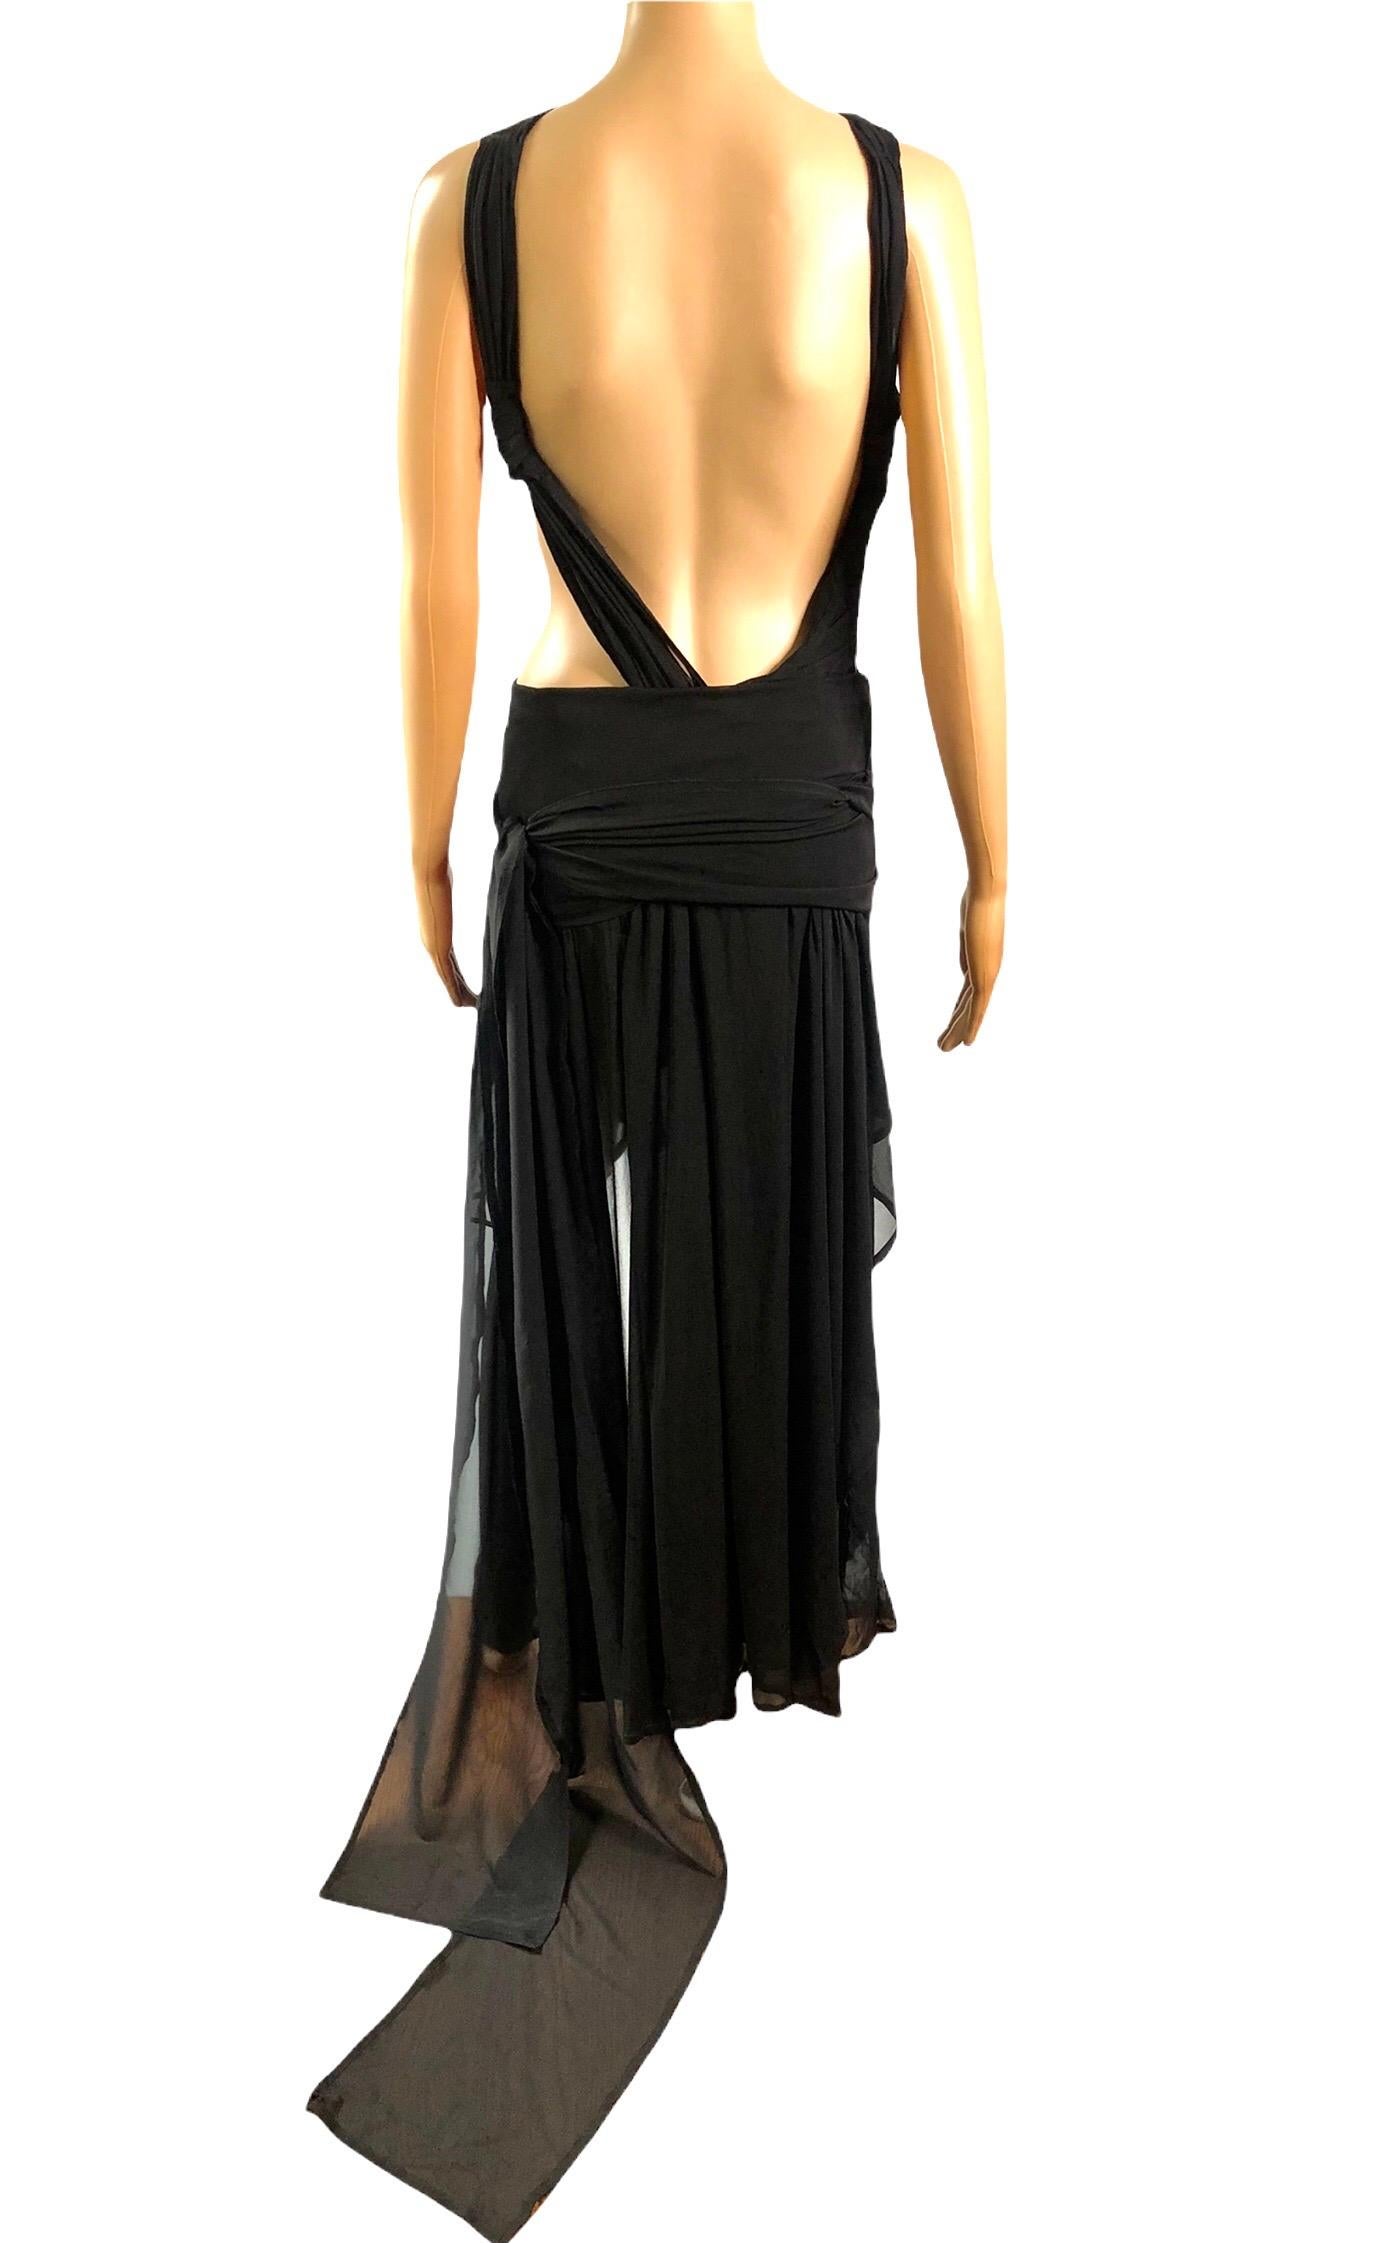 Tom Ford for Yves Saint Laurent S/S 2002 Runway Sheer Cutout Black Dress Gown For Sale 8